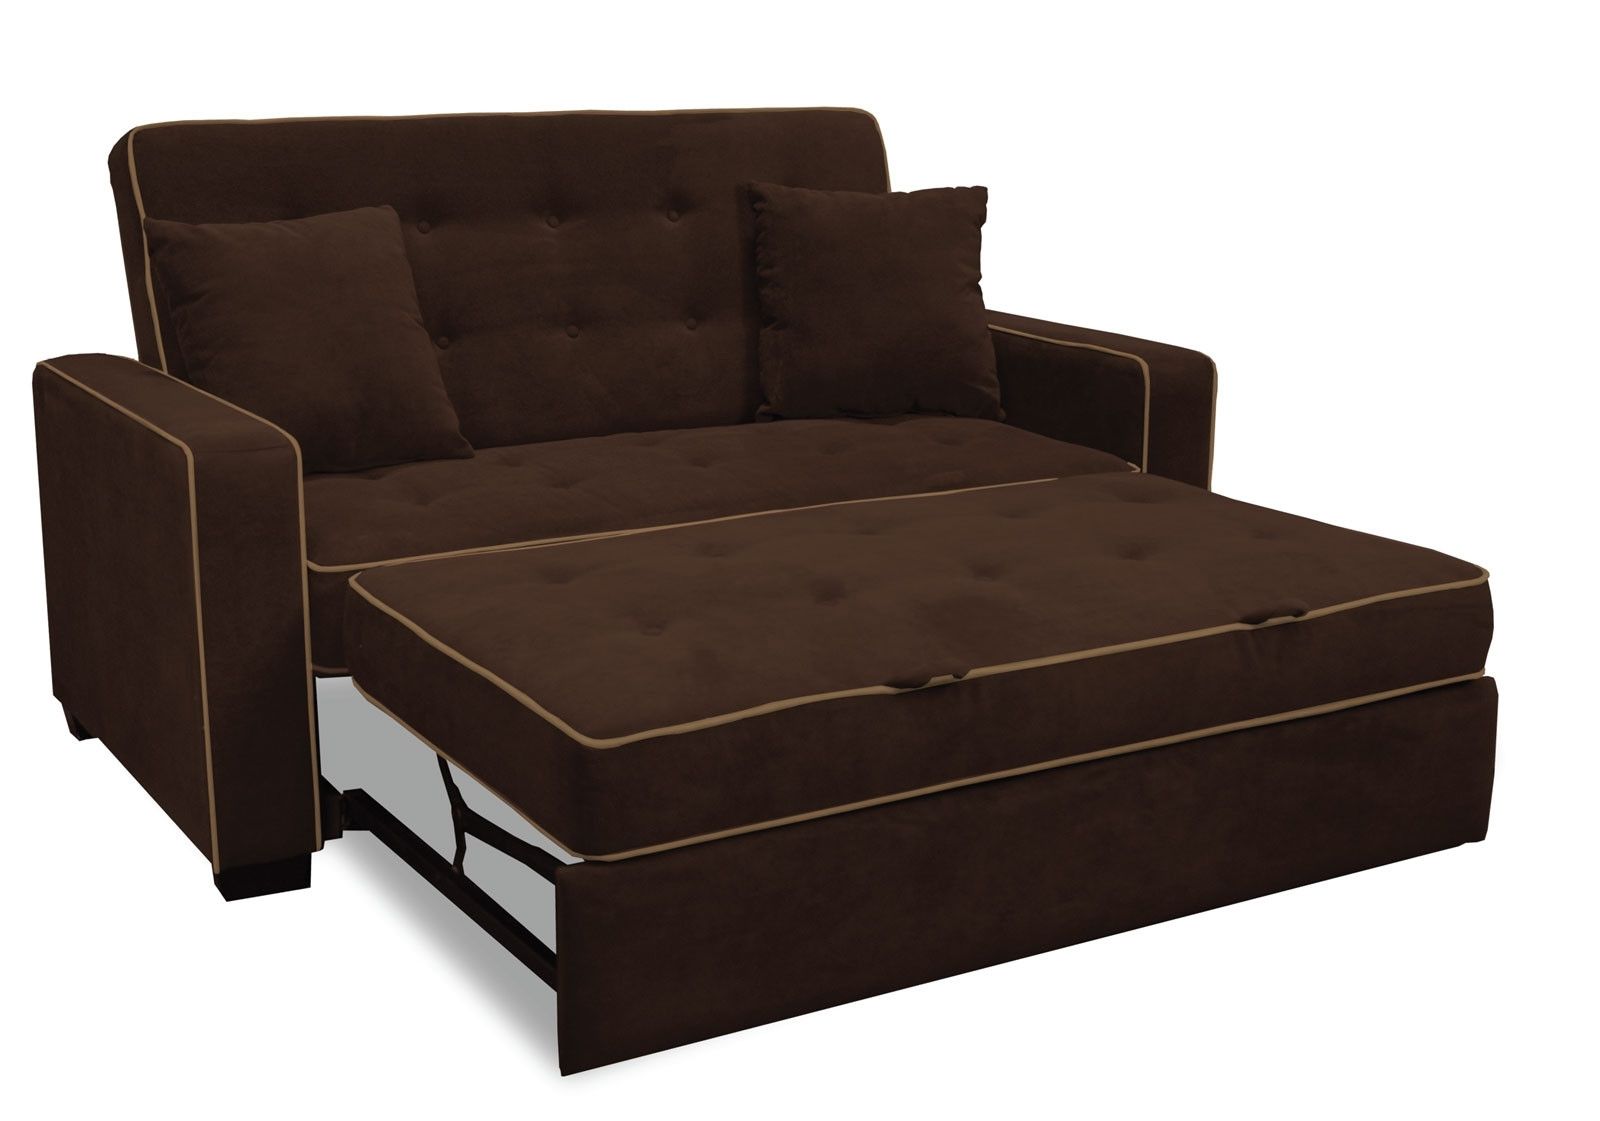 Banquette Bz Ikea Living Room Loveseat Sleeper Sofa Ikea Covers In Well Known Ikea Loveseat Sleeper Sofas (View 8 of 20)